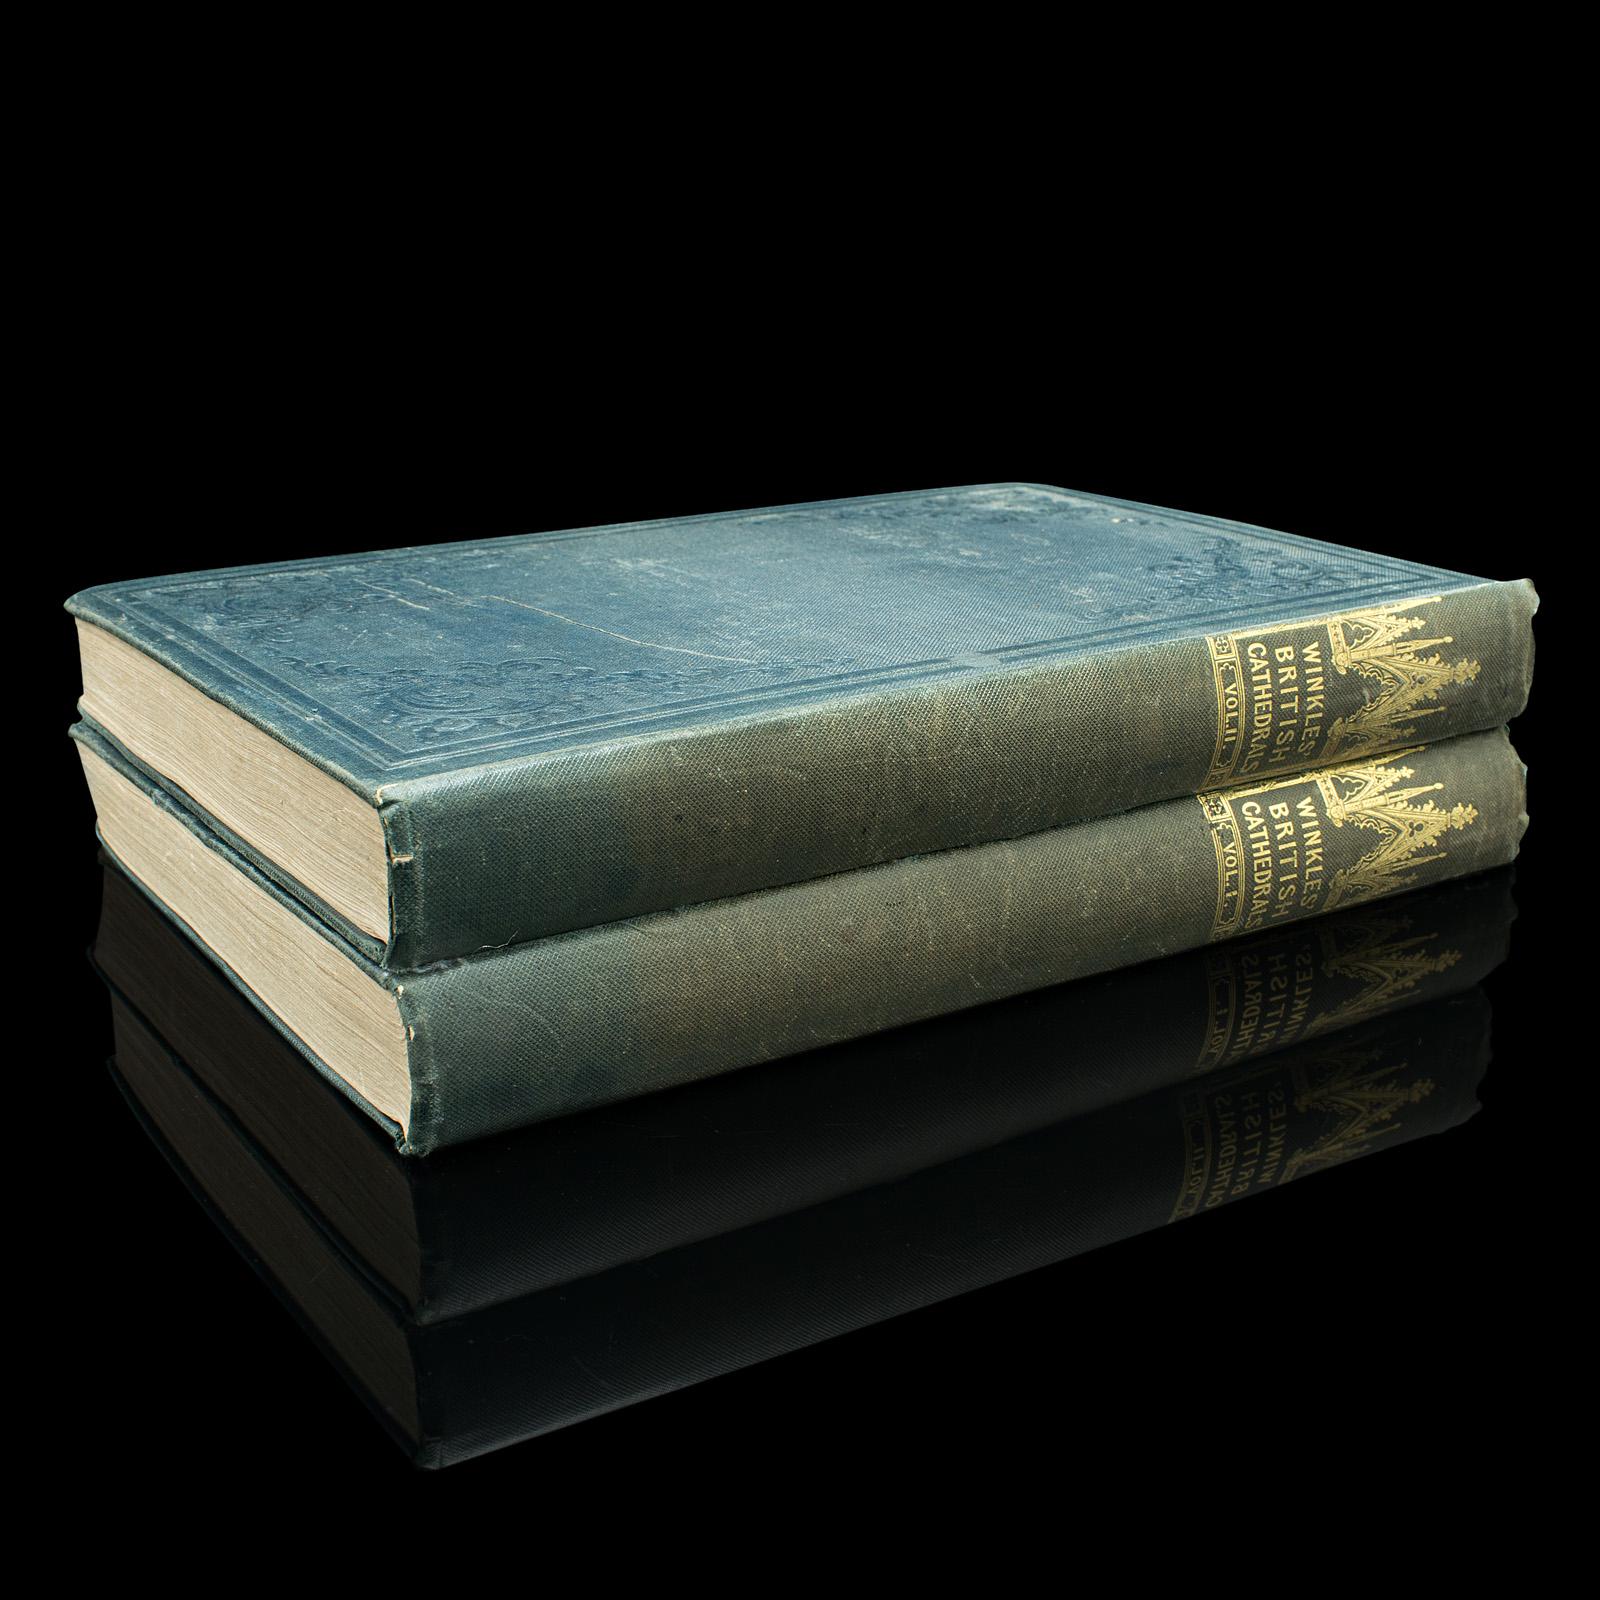 This is a pair of two antique books, Volume 1 & 2 of Winkles' British Cathedrals. An English language, hard bound illustrated reference guide to 19th century architecture, dating to the early Victorian period, dated 1838.

Robert Garland (1808 -